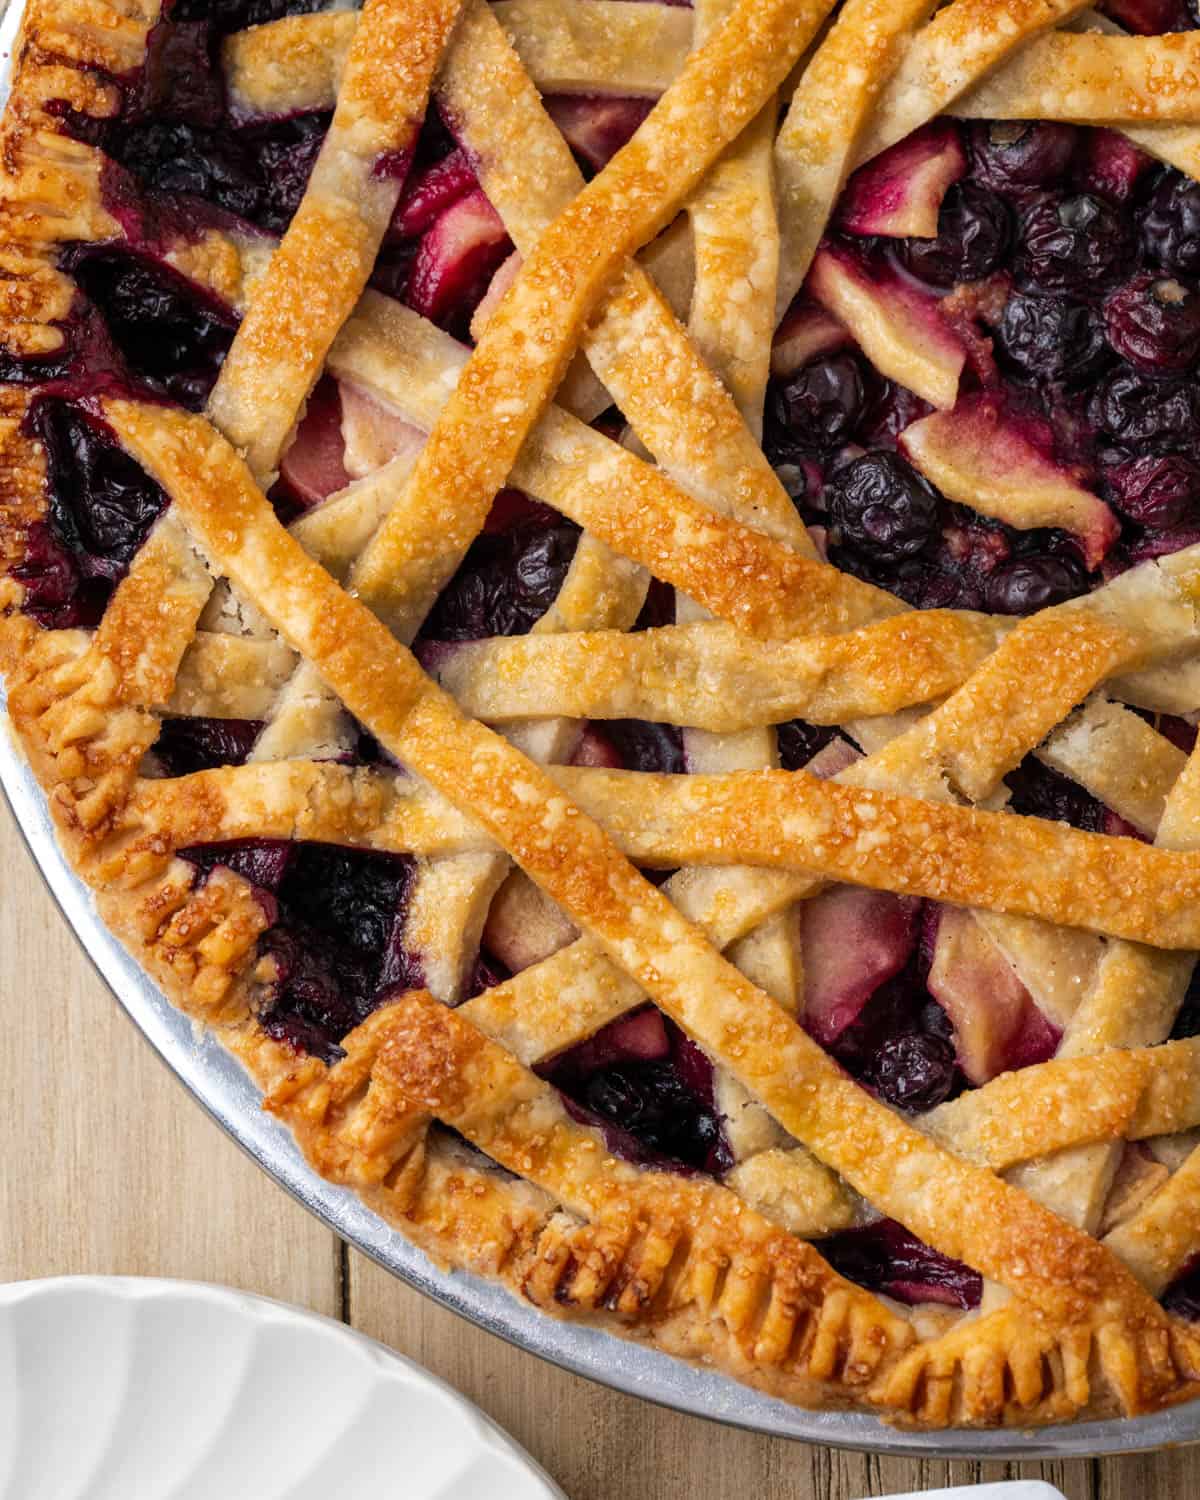 A freshly baked apple blueberry pie sitting on a wooden table. 